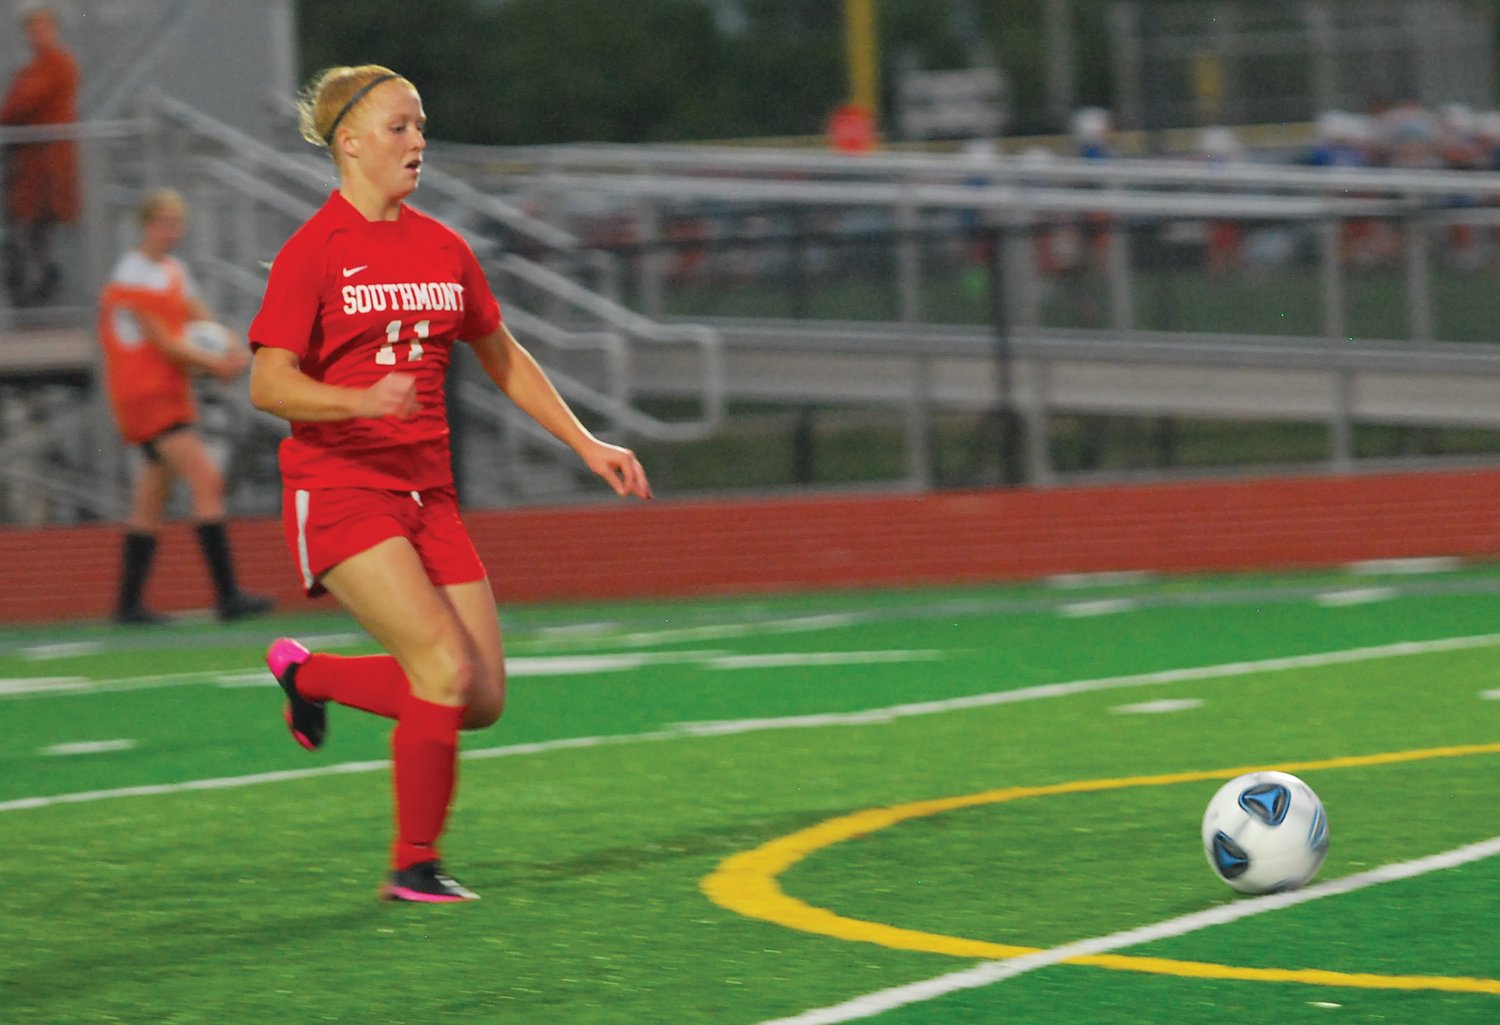 Southmont senior Hanna Nichols gave the Mounties an early lead with a goal 10 minutes into the game.